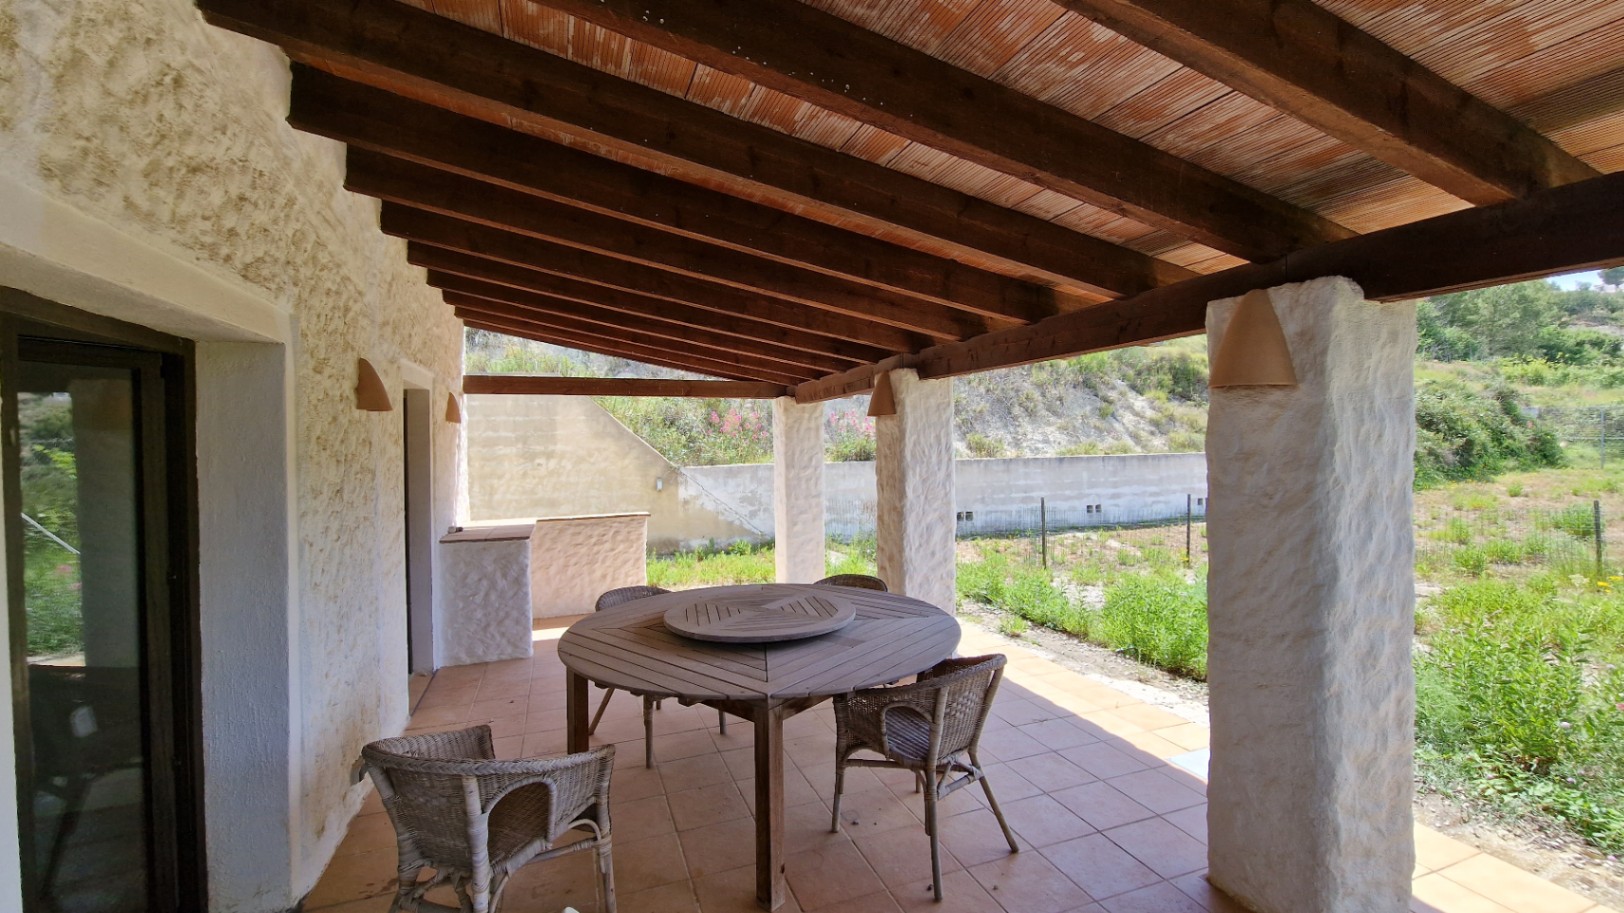 Country houses in Benissa ideal for Bed & Breakfast